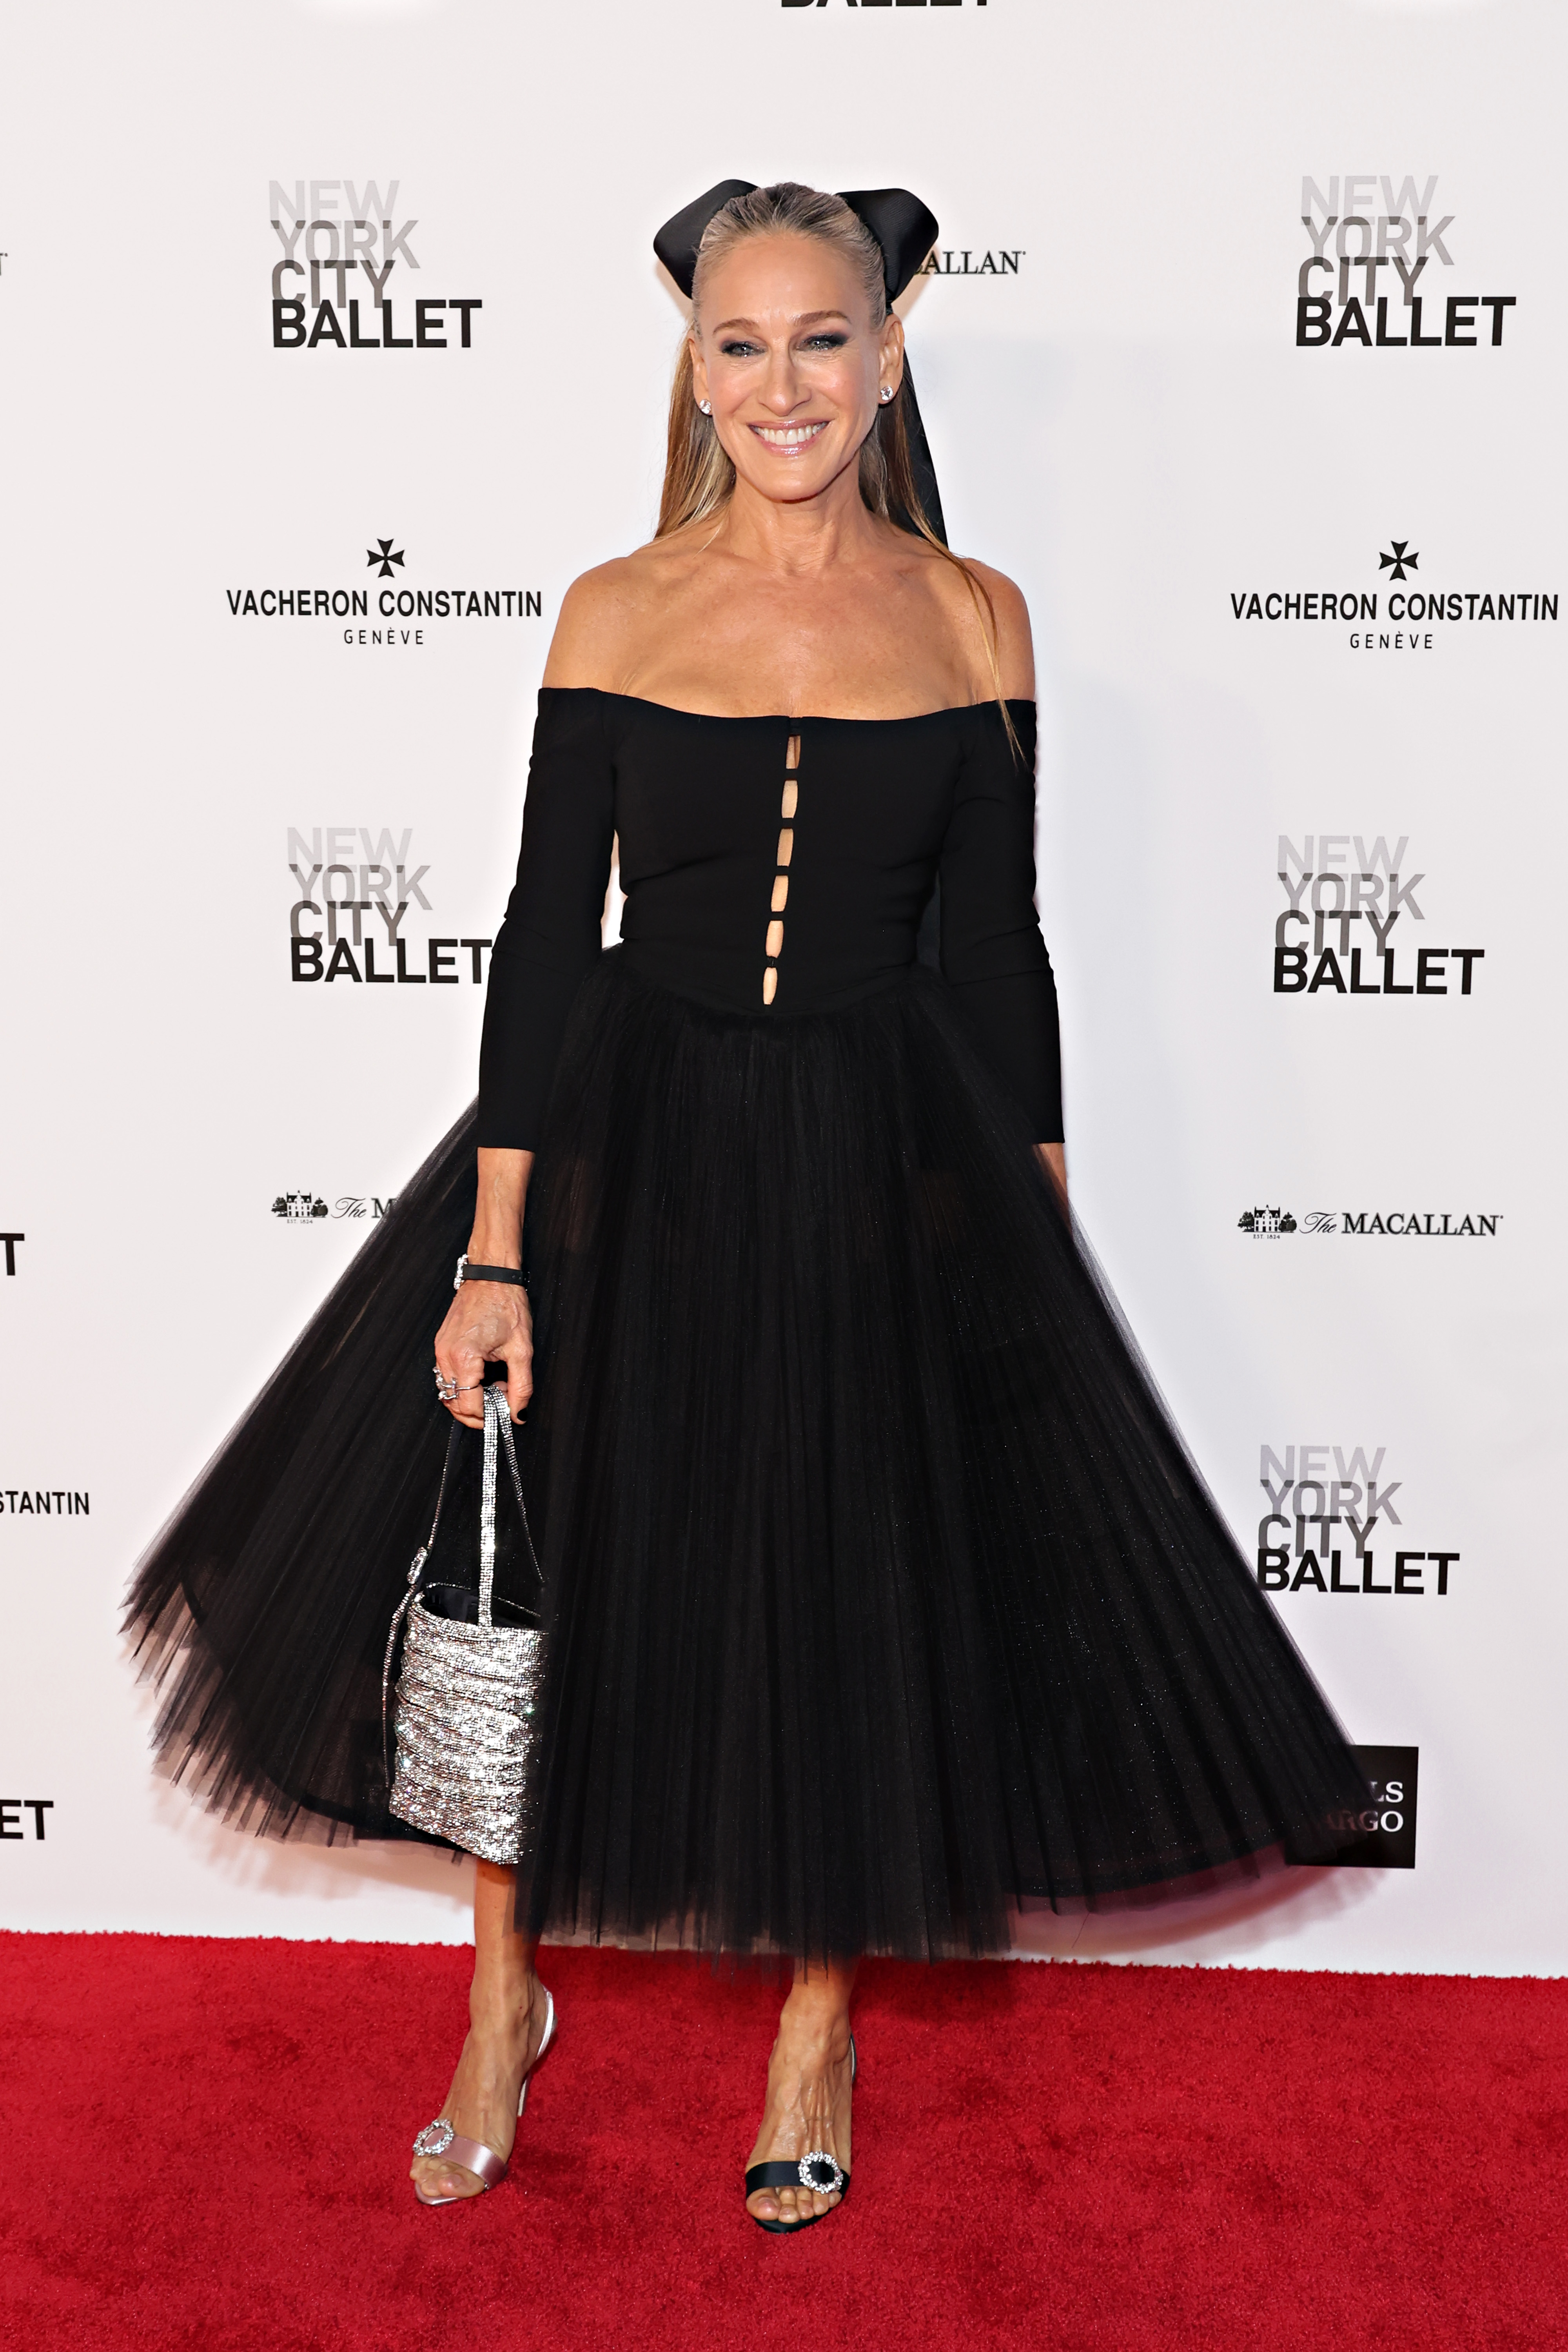 Sarah Jessica Parker at an event wearing a black off-the-shoulder dress with tulle skirt and carrying a glittery handbag